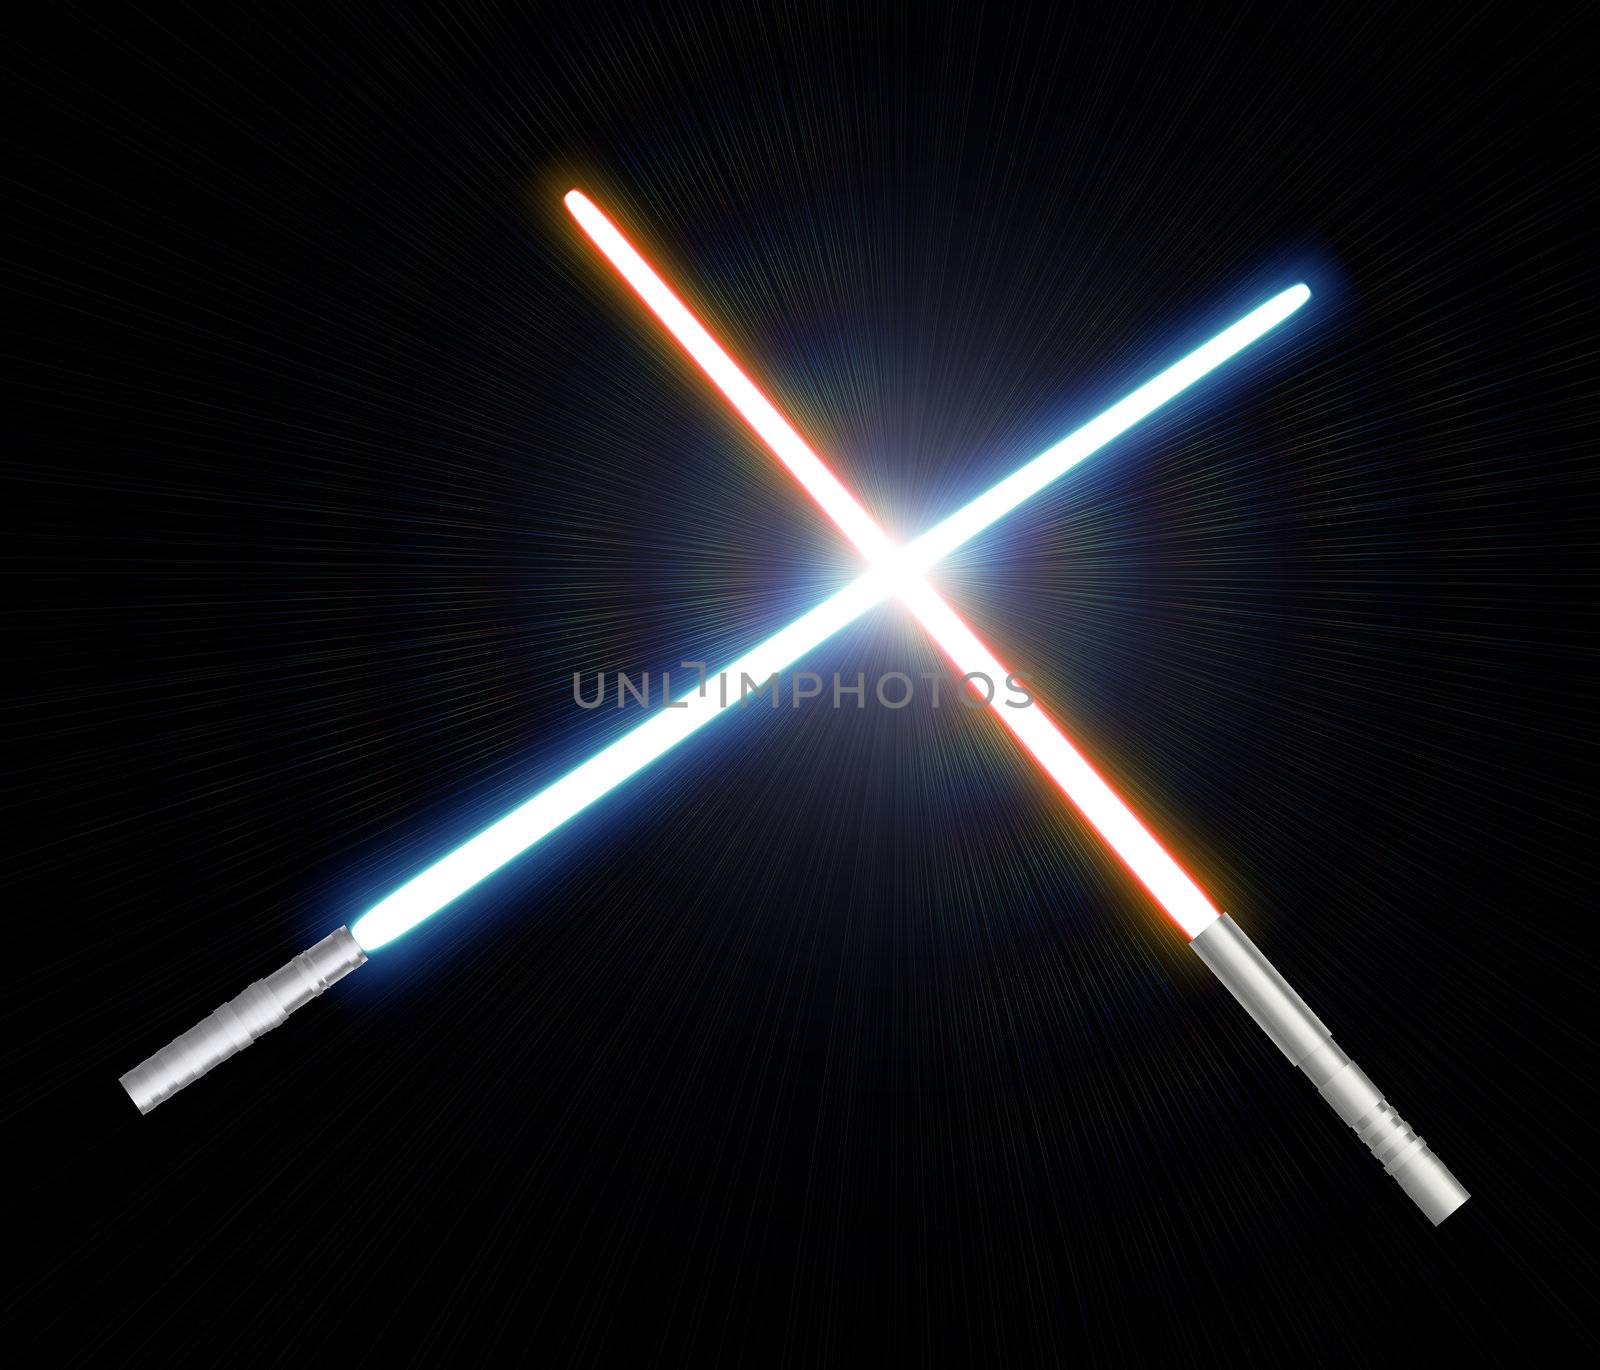 An illustration of two crossed laser light sabers